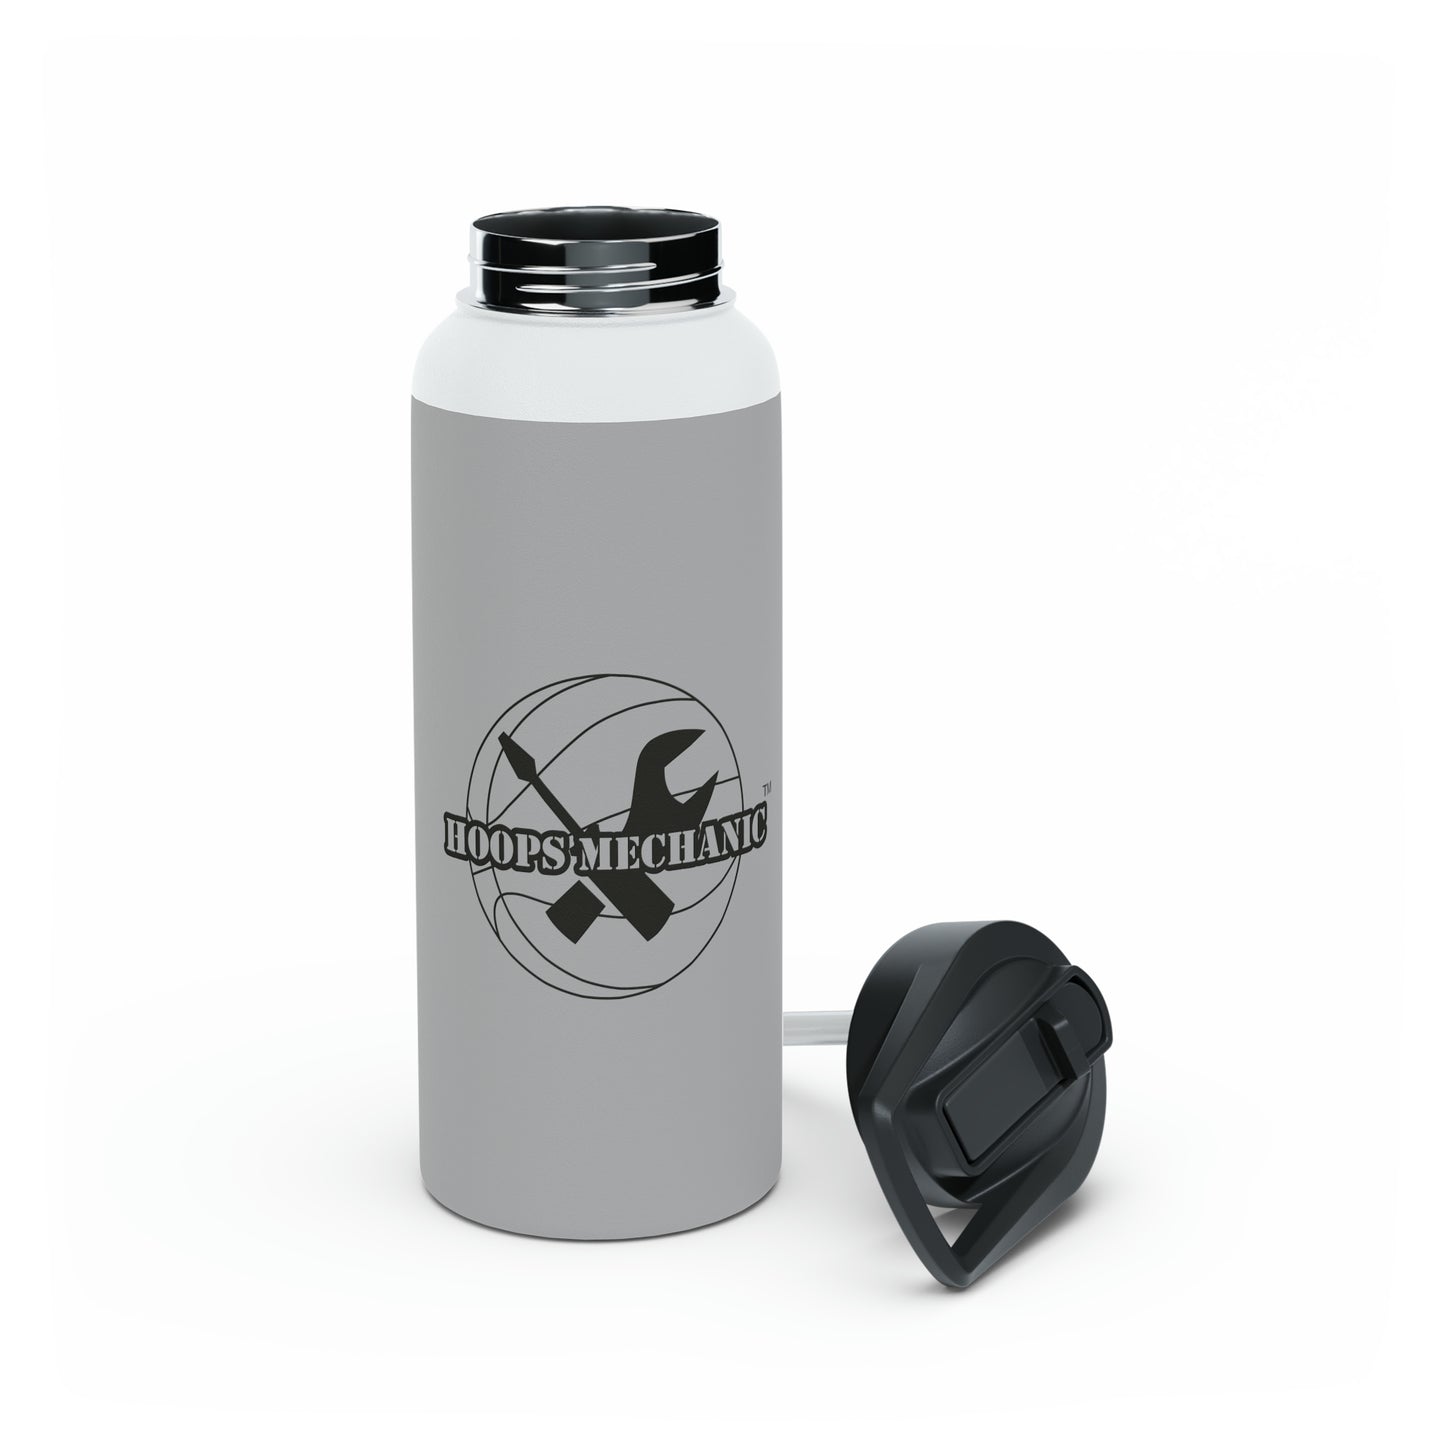 Grey Stainless Steel Water Bottle (3 Sizes)